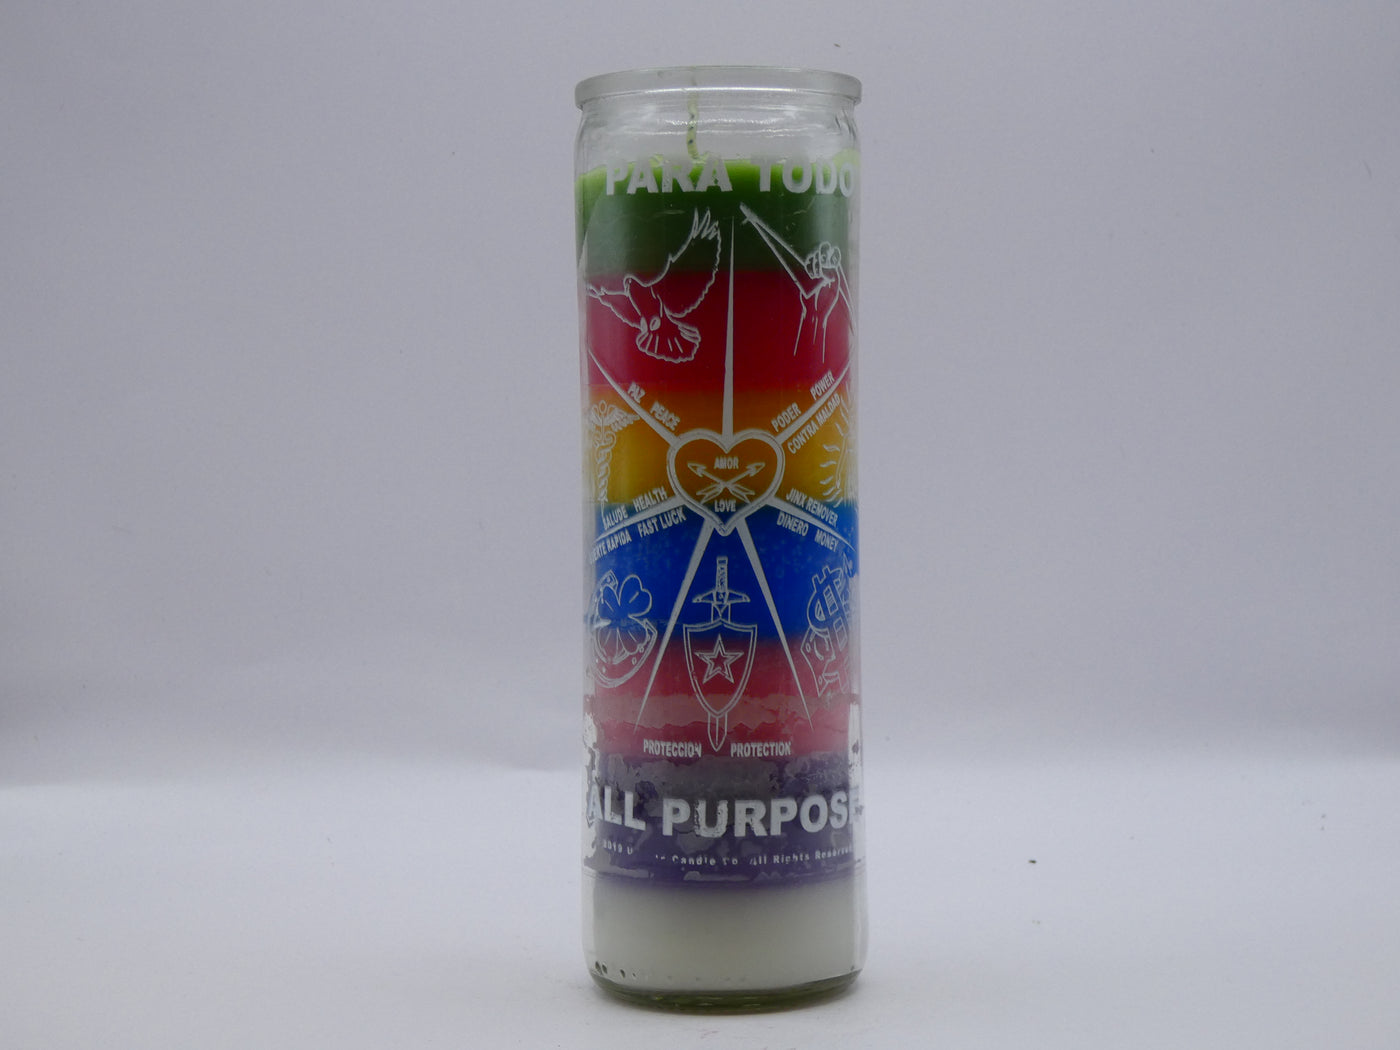 7 Colored Printed Candles